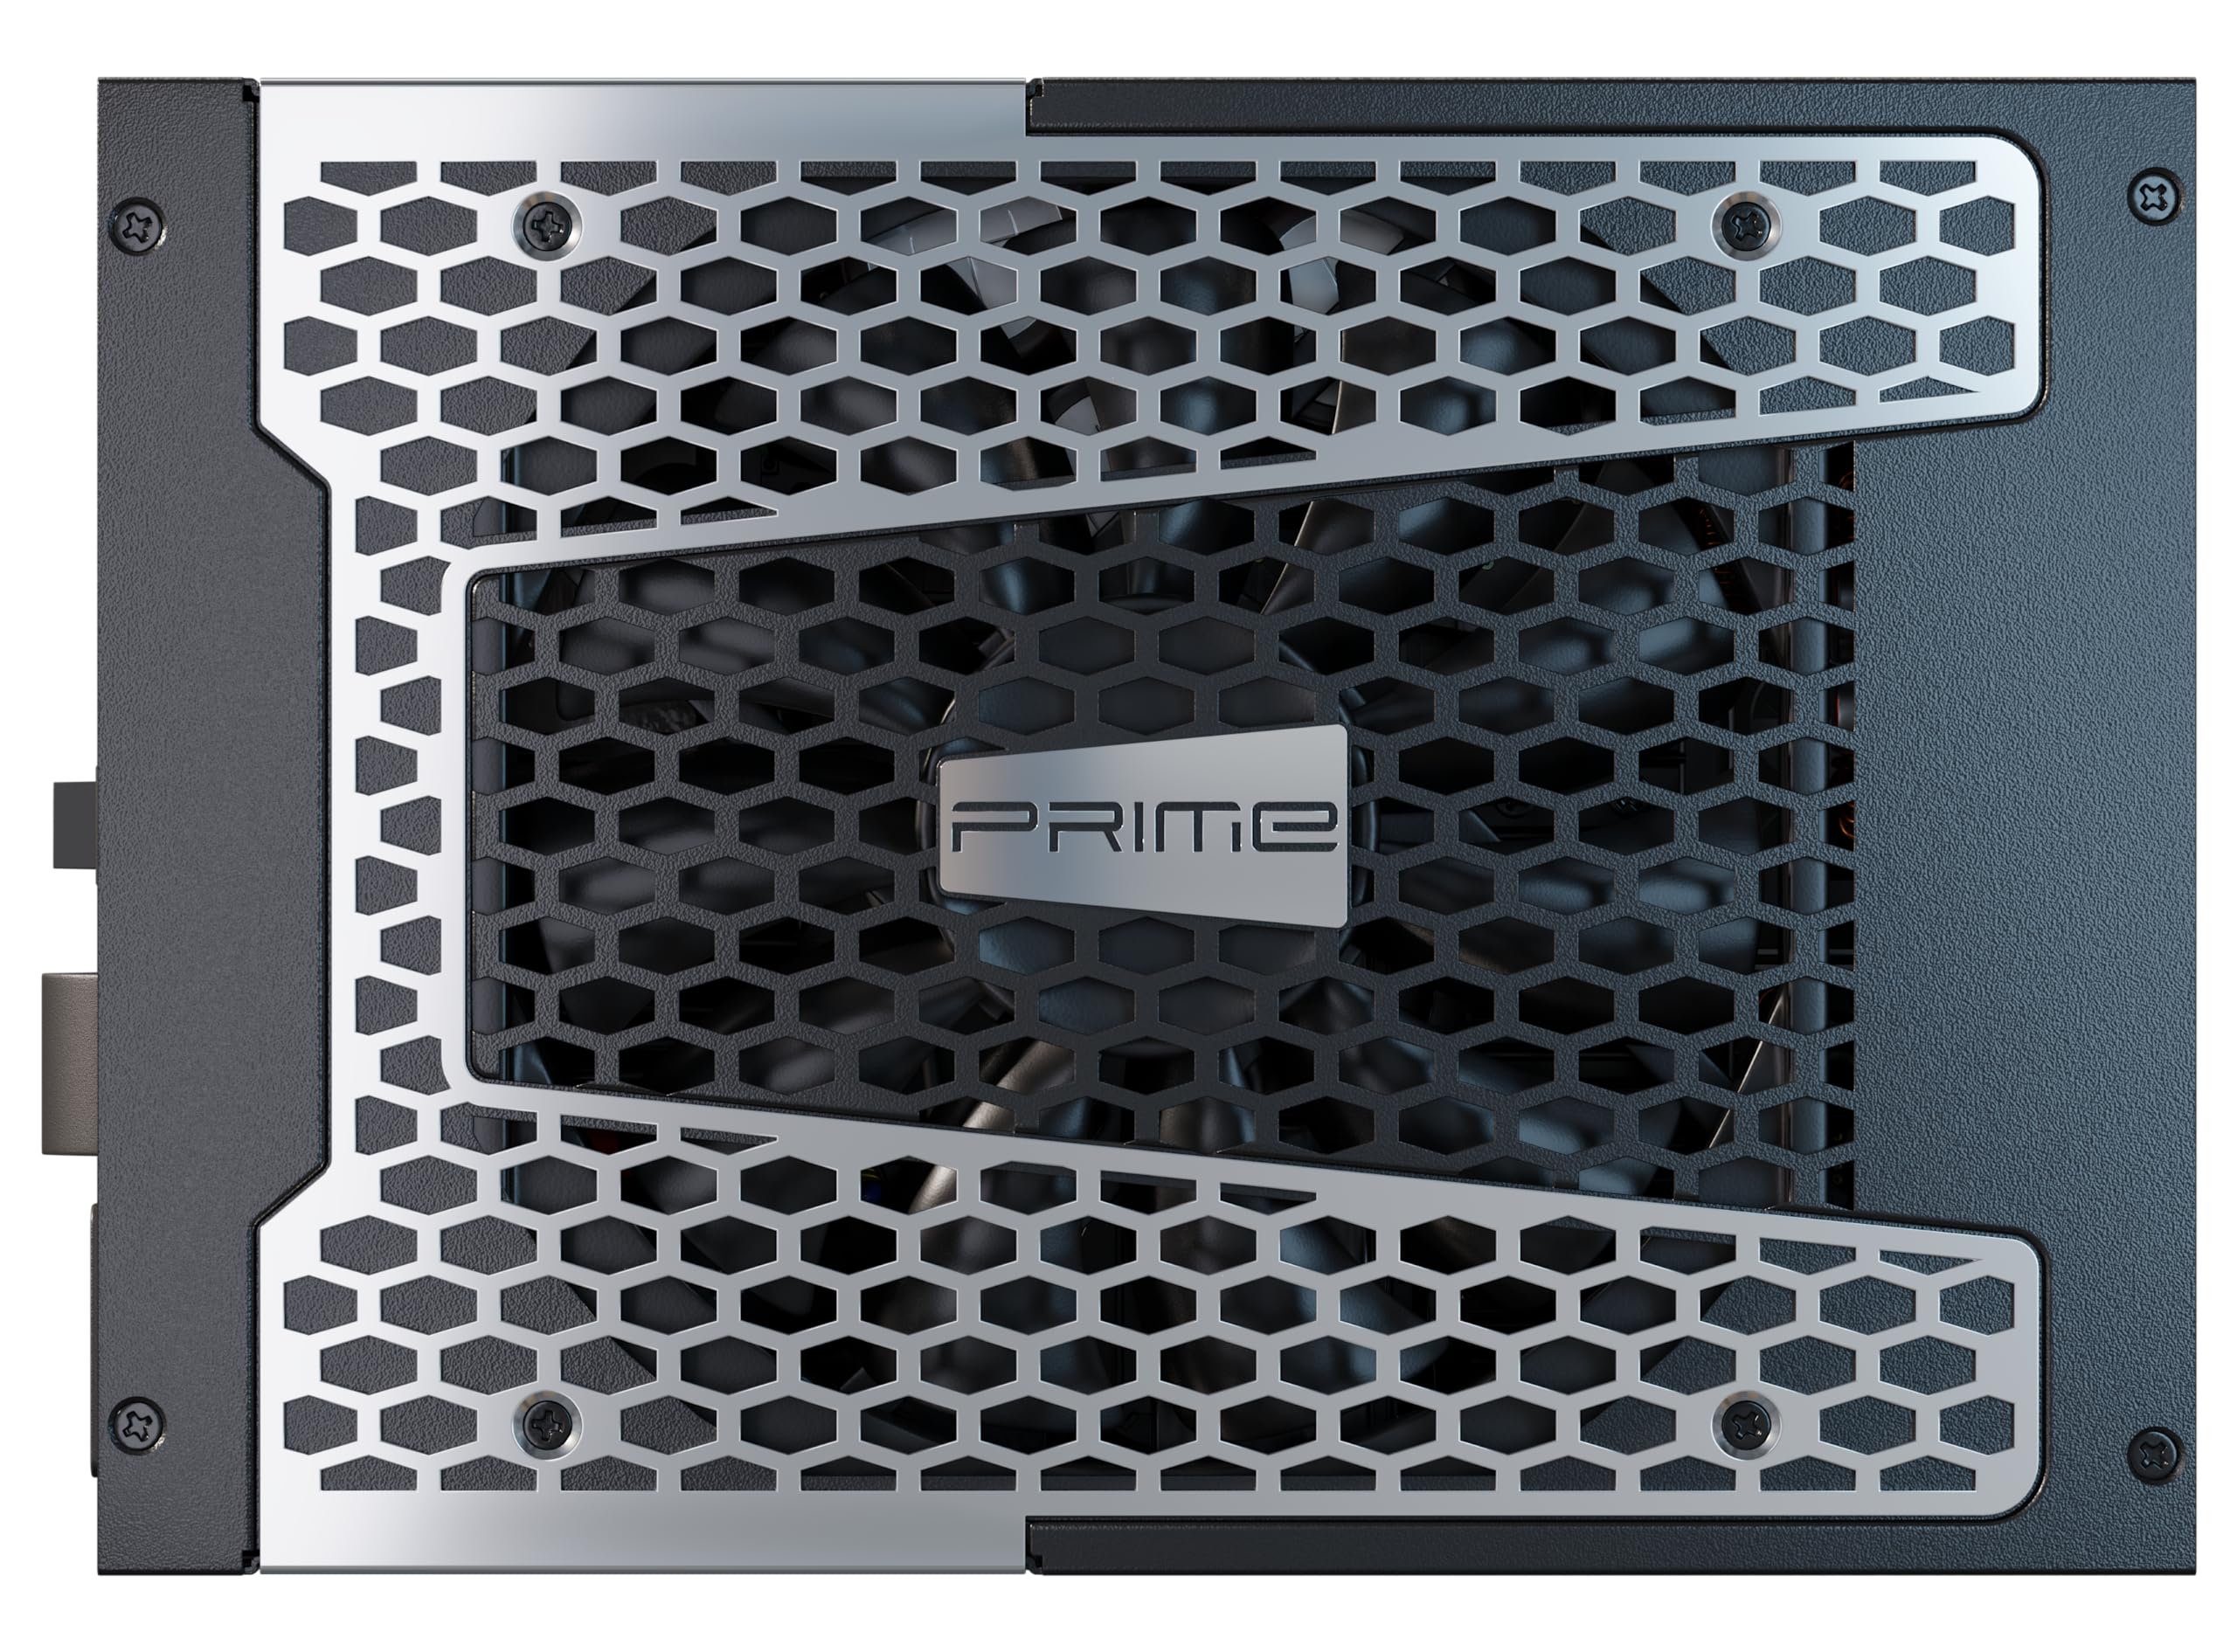 Seasonic Prime ATX 3.0 TX-1600, 1600W 80+ Titanium, Full Modular, Fan Control in Fanless, Silent, and Cooling Mode, 12 Year Warranty, Perfect Power Supply for Gaming, SSR-1600TR2.